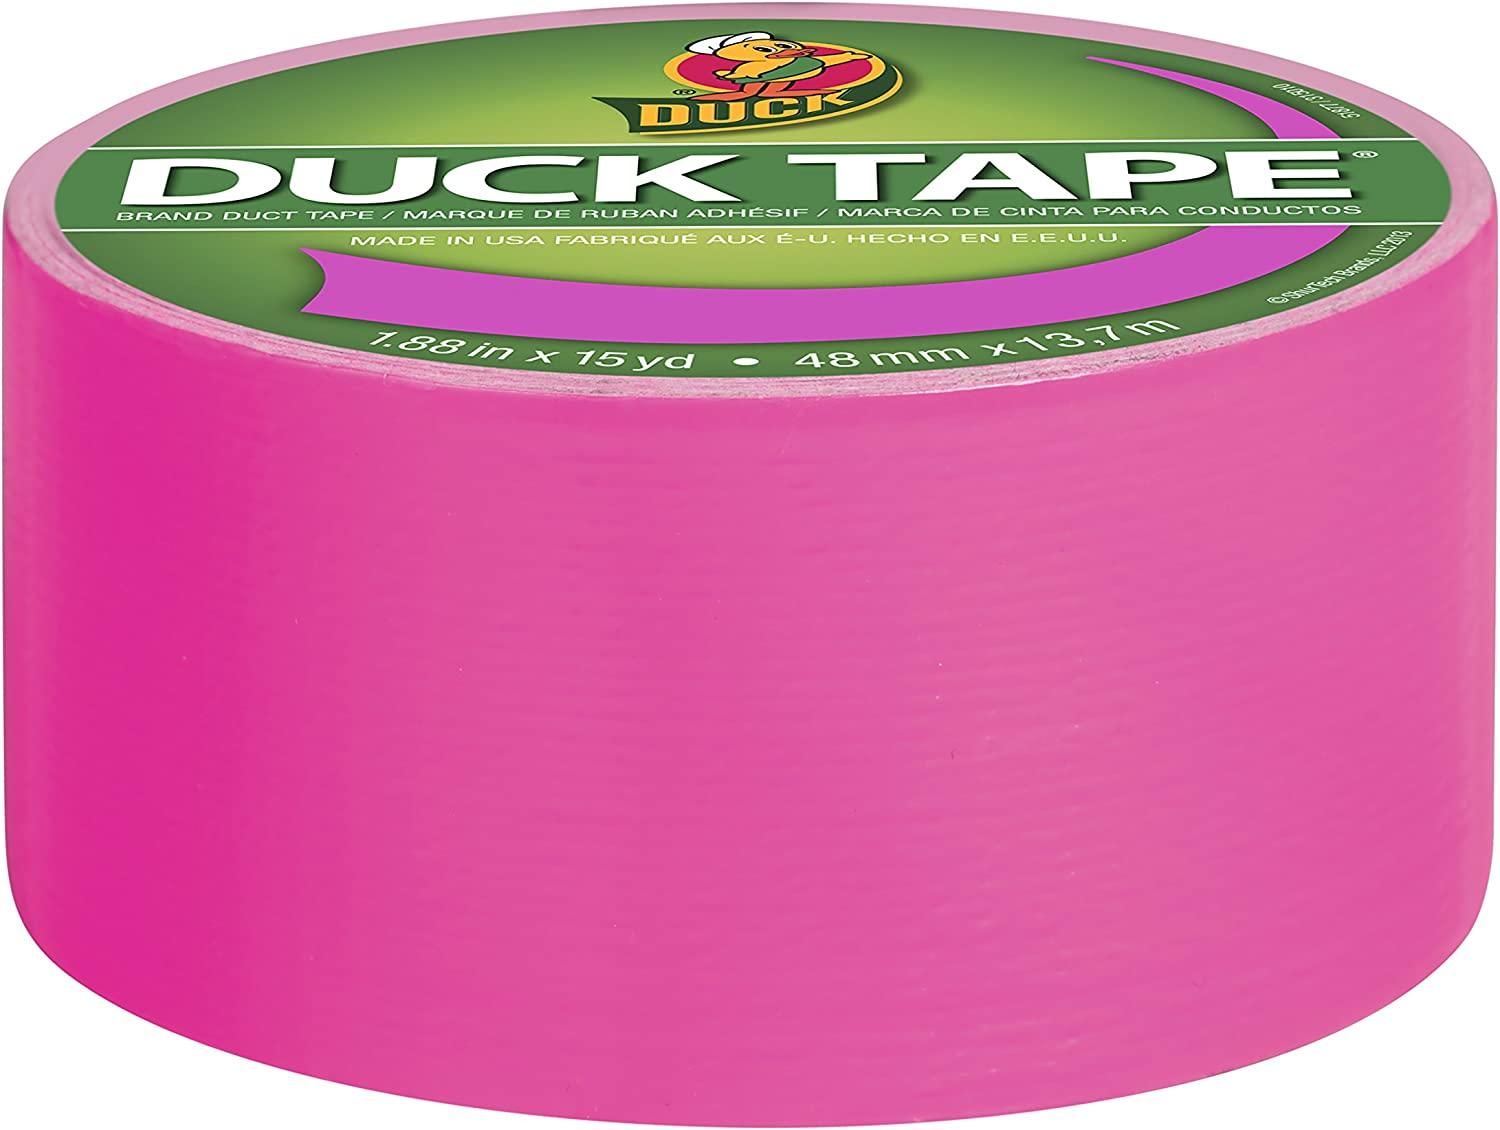 Duck Tape Colored Duct Tape  Duct tape colors, Duck tape, Duct tape